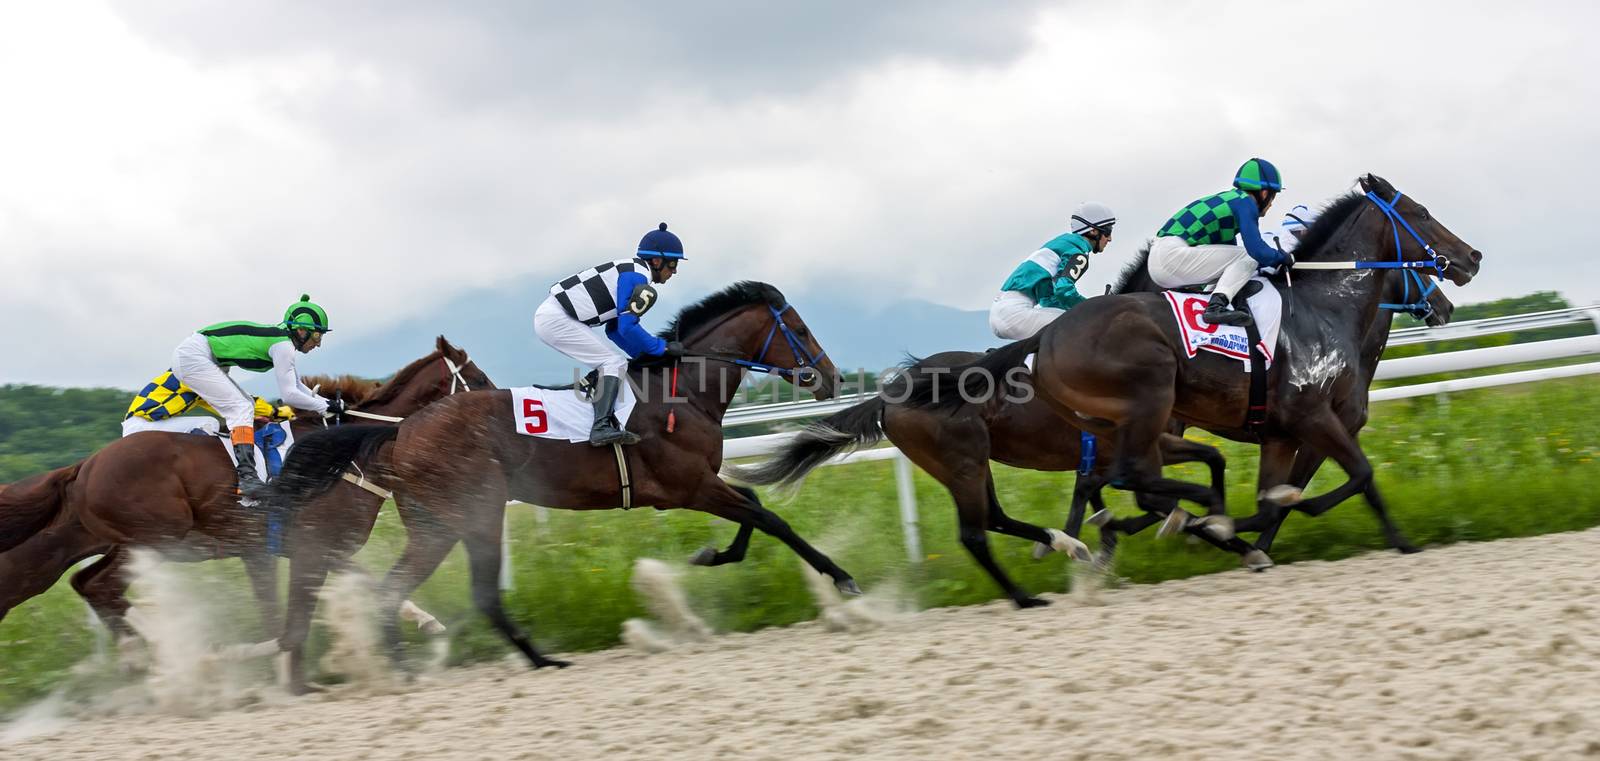 Start gates for horse races for the prize of Asuana on Pyatigorsk hippodrome, Northern Caucasus, Russia.